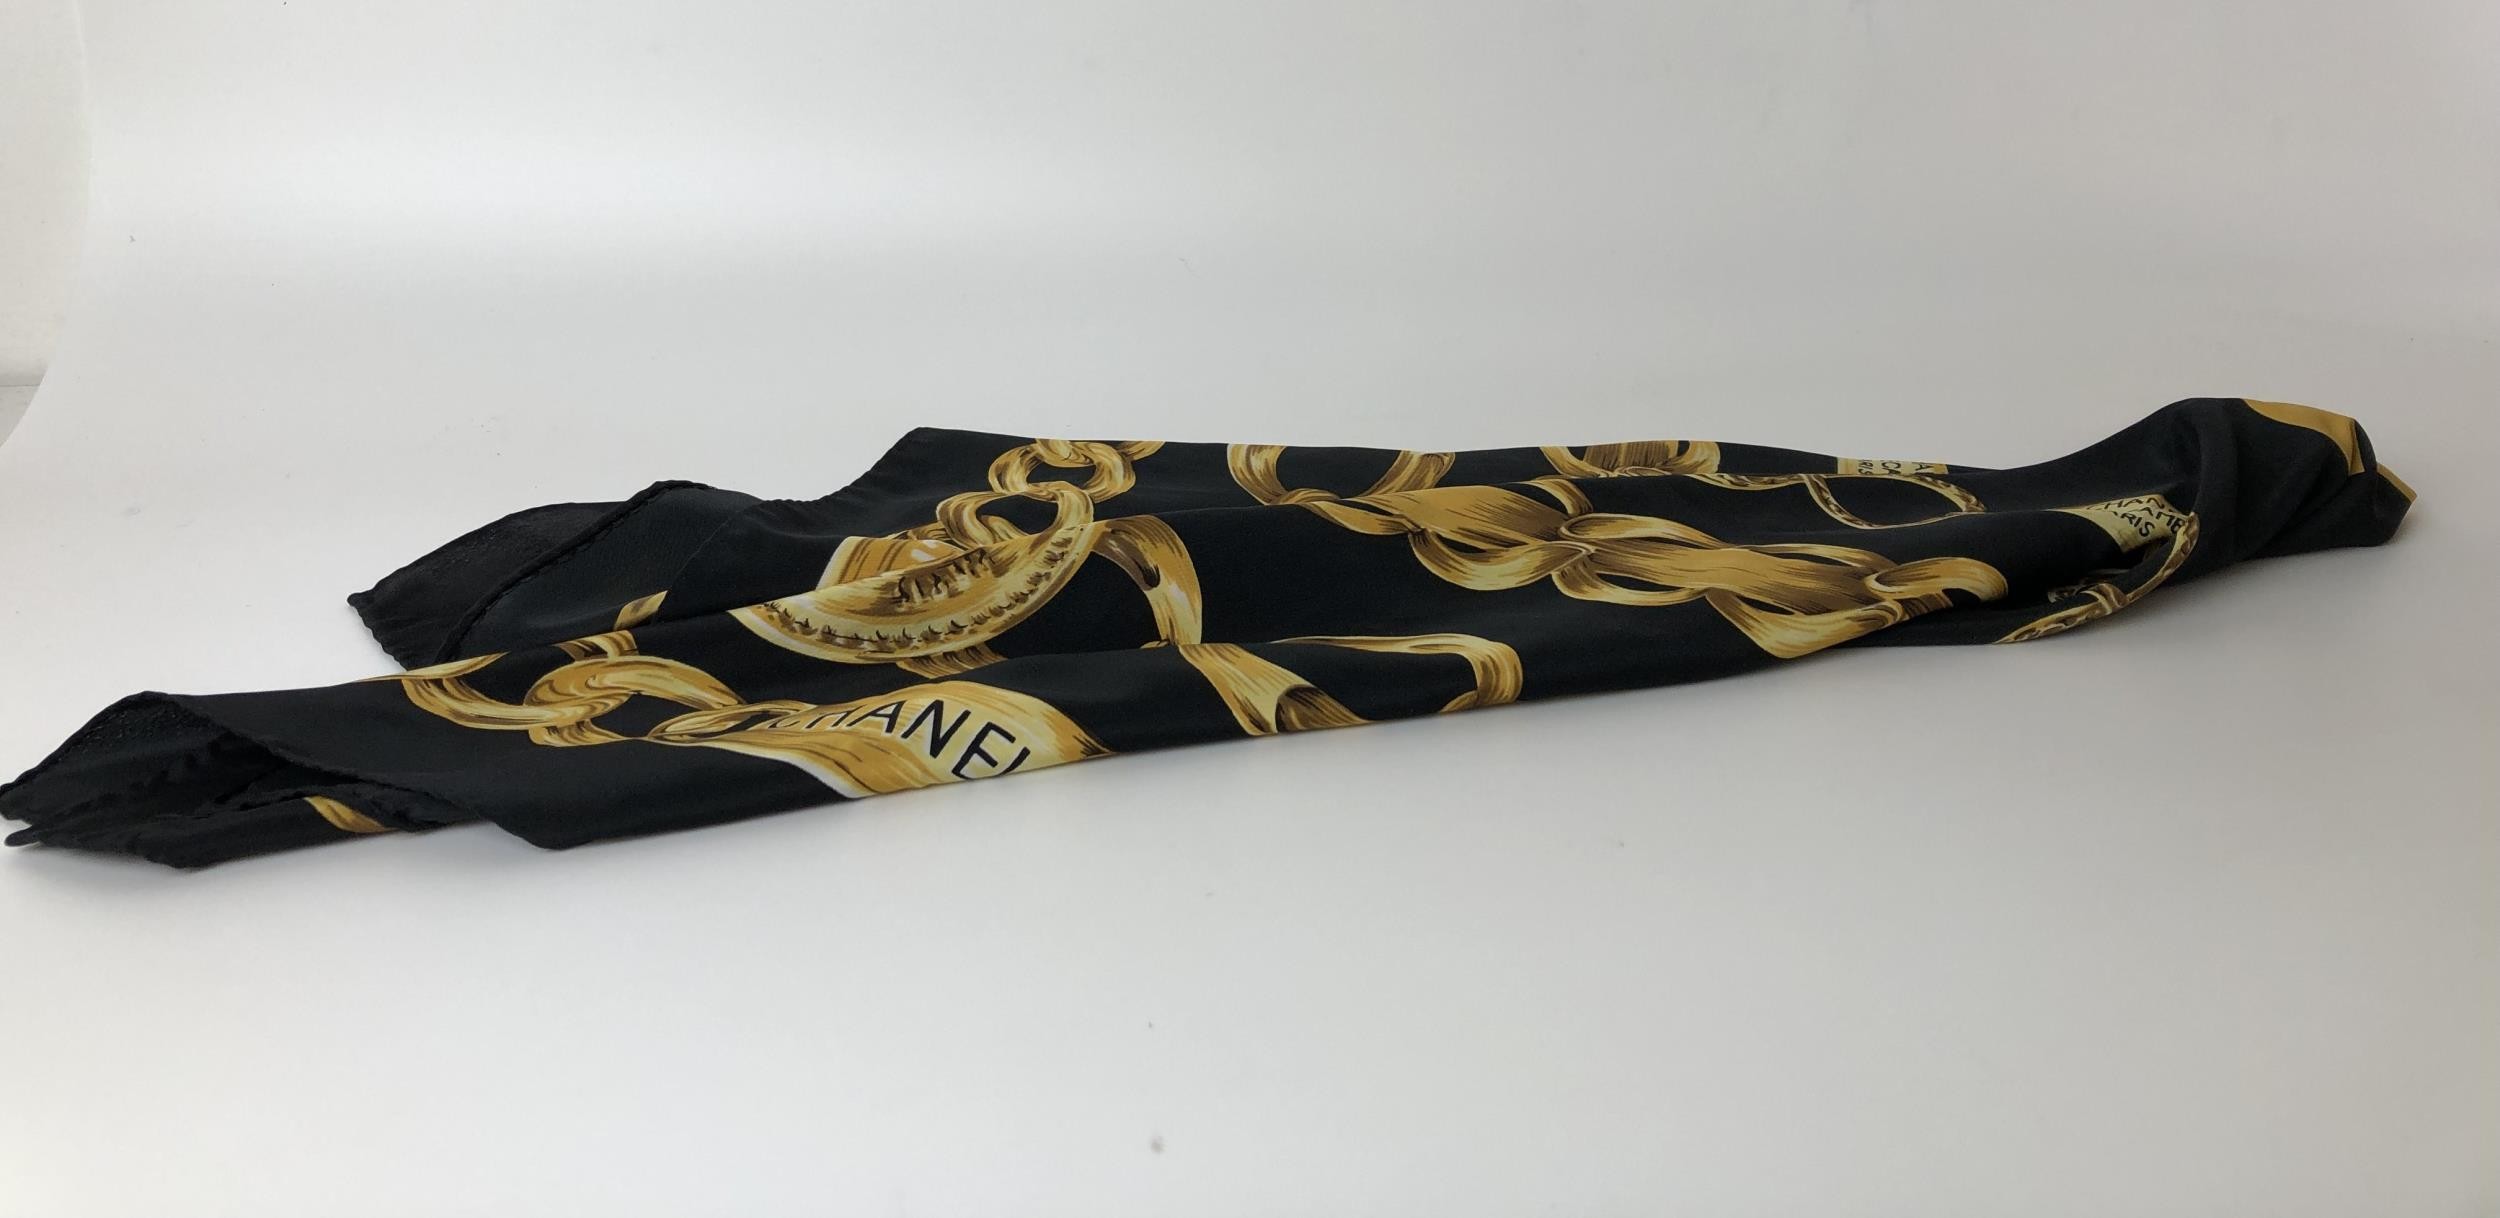 A Chanel scarf - Image 4 of 6